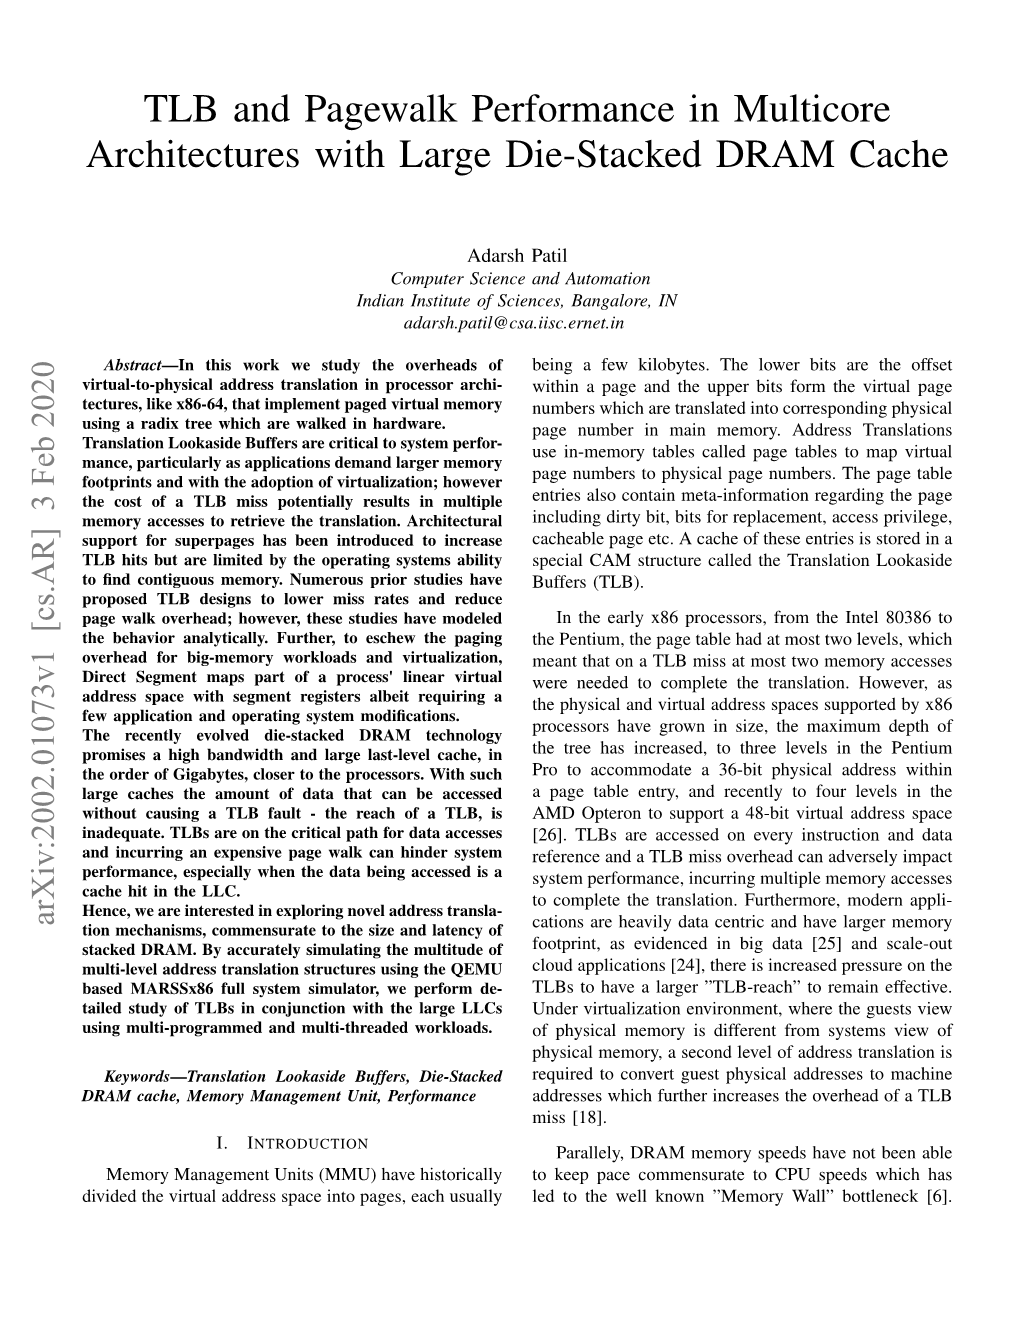 TLB and Pagewalk Performance in Multicore Architectures with Large Die-Stacked DRAM Cache